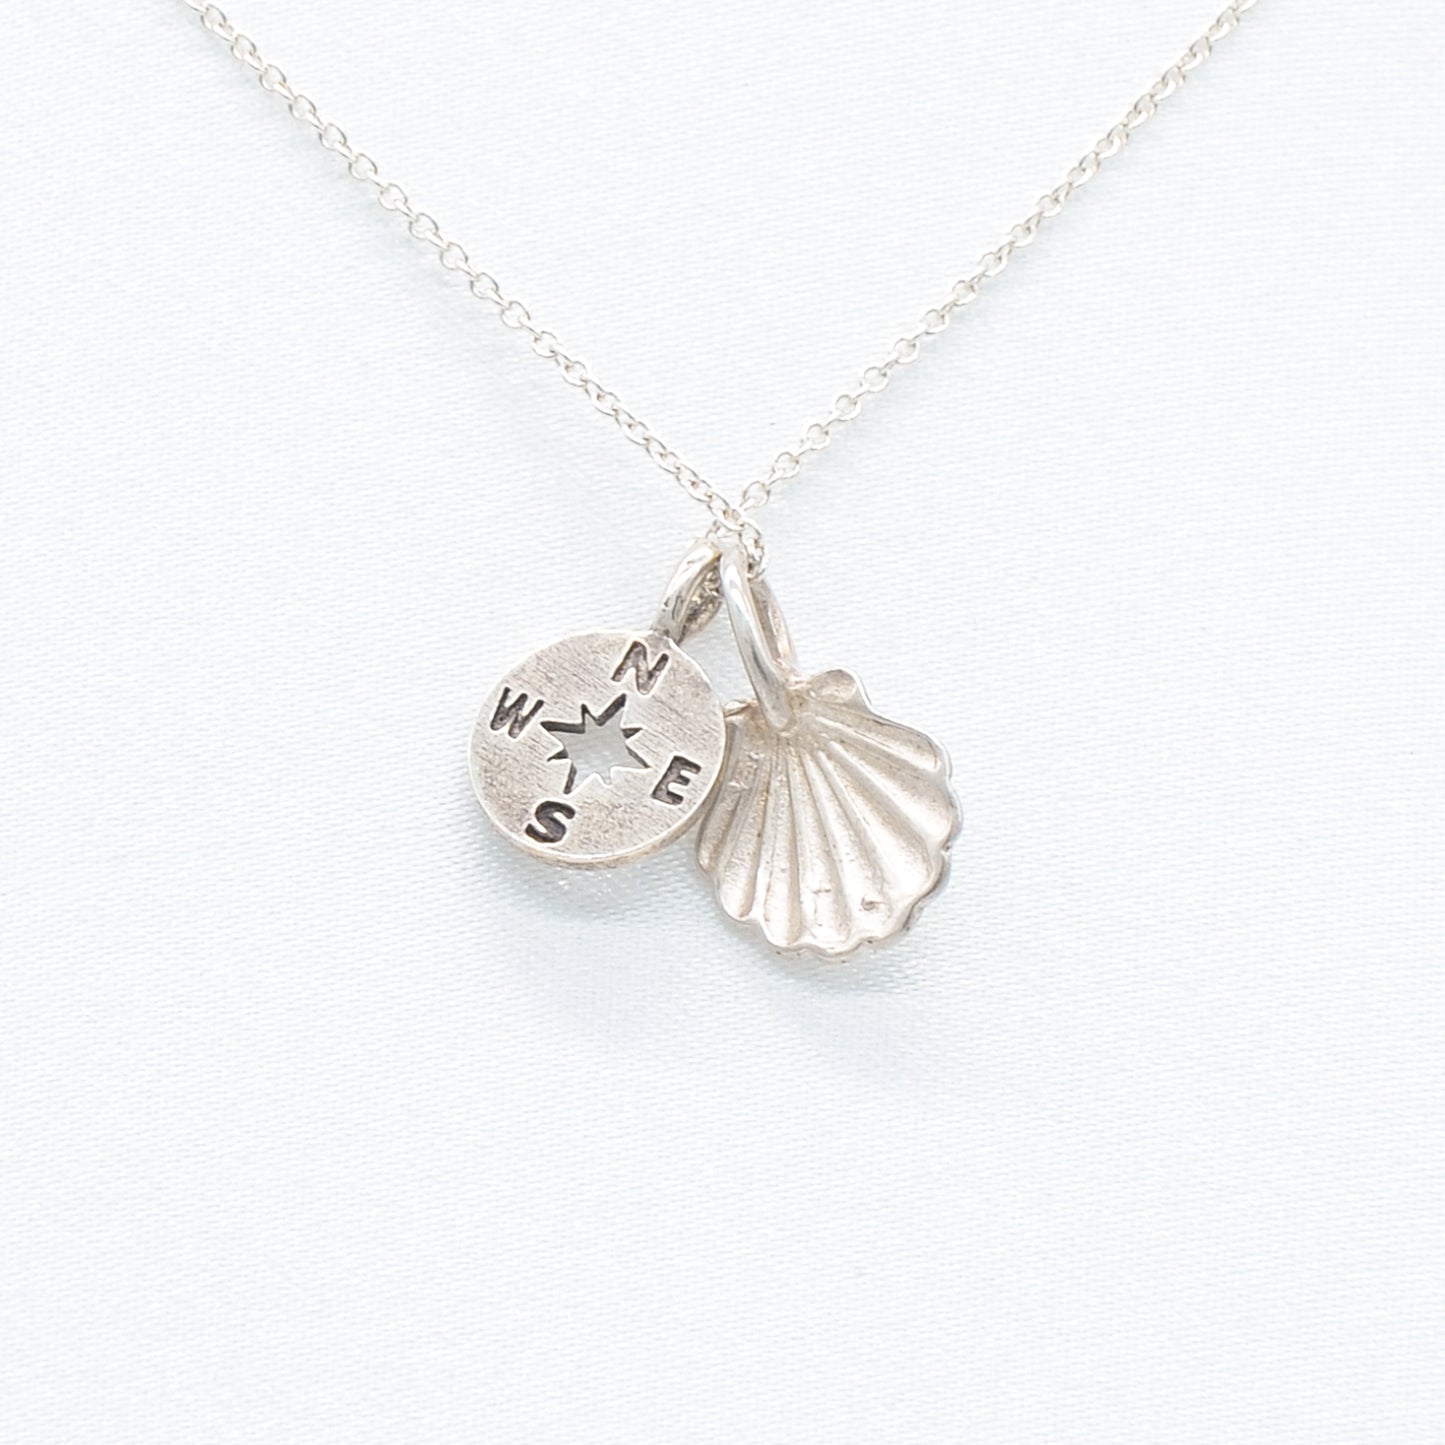 Seashell & Compass Necklace